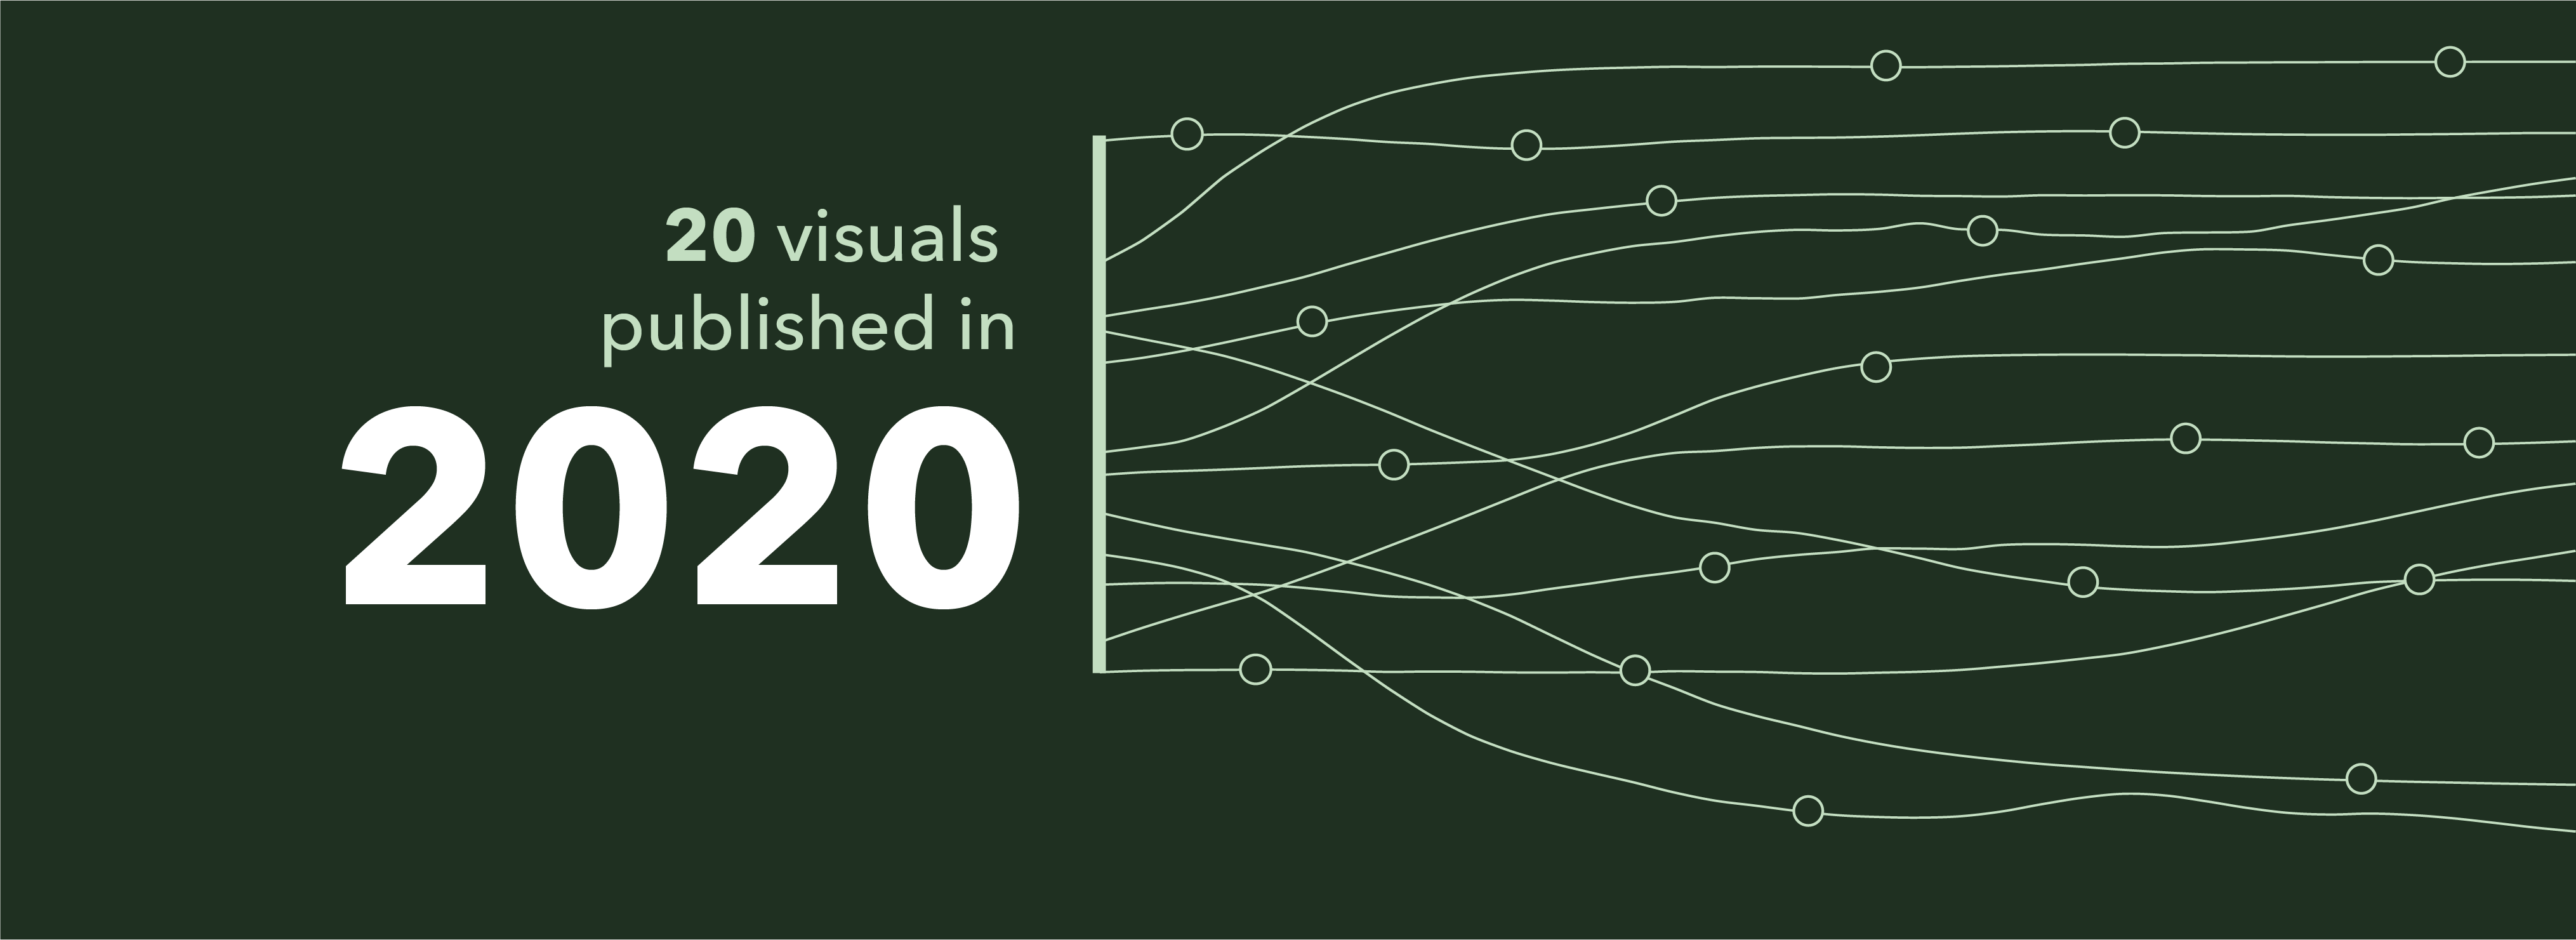 20 Visuals published in 2020